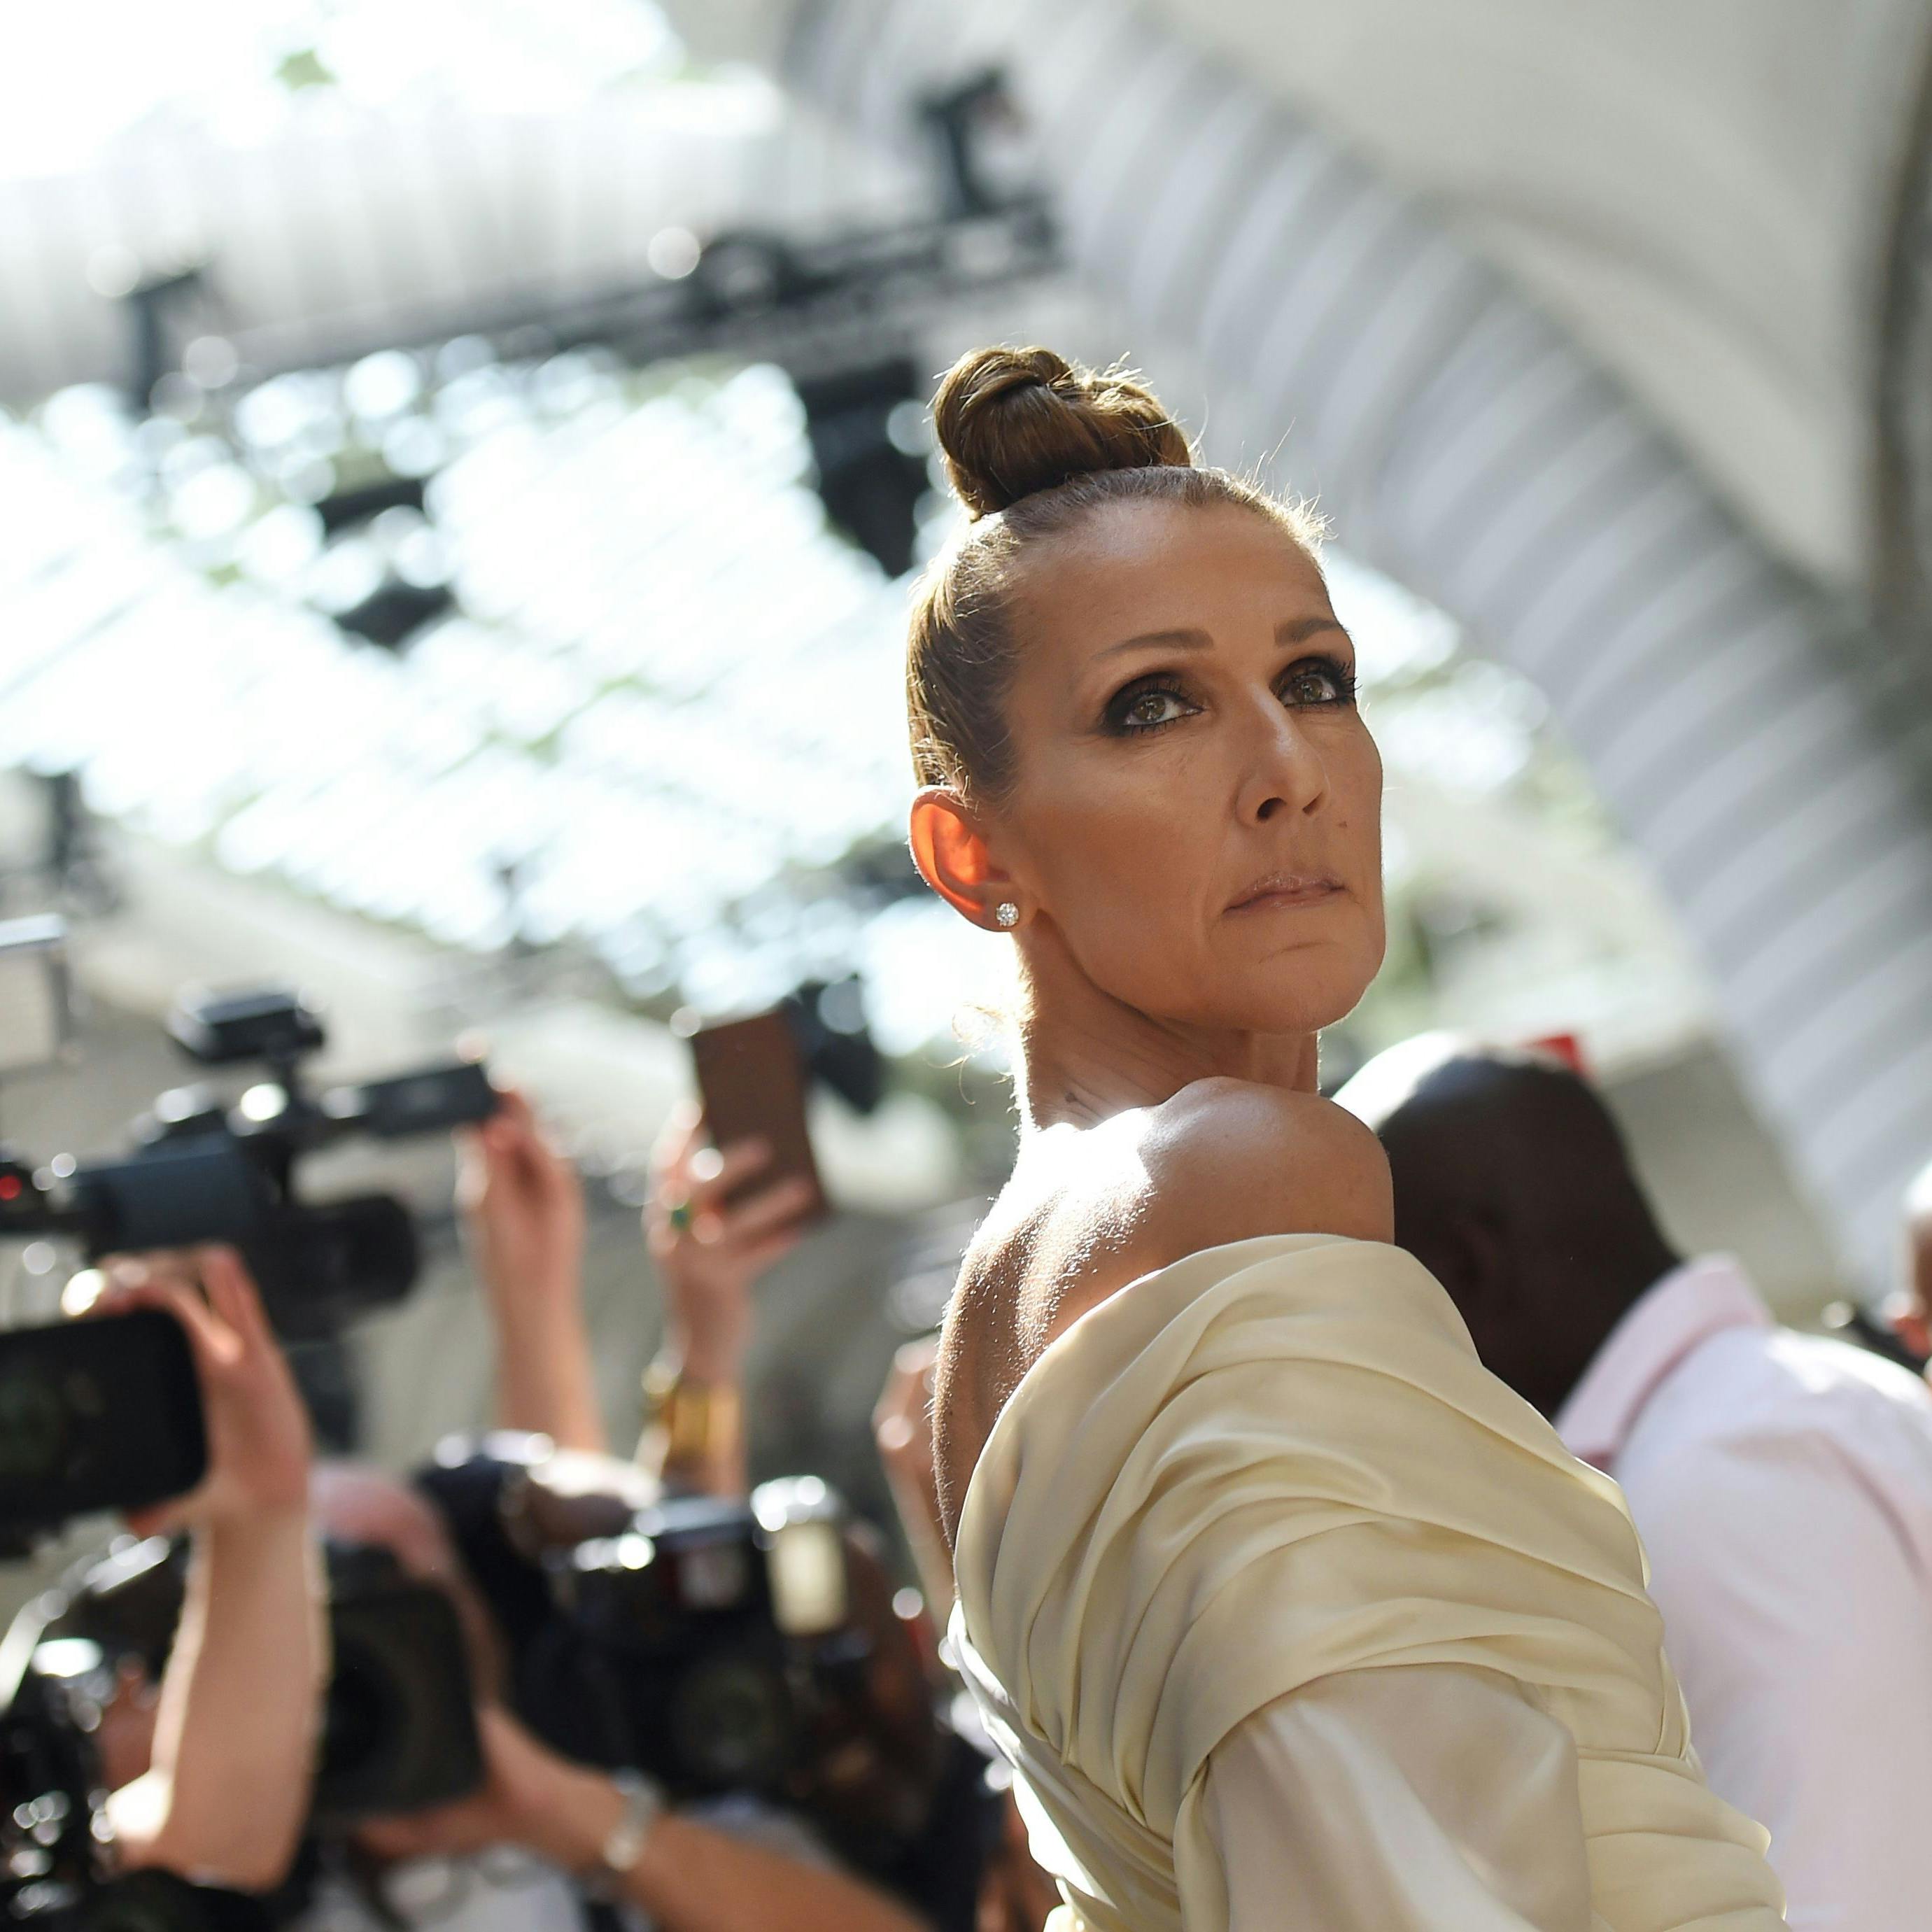 TOPSHOT - Canadian singer Celine Dion poses as she arrives for the Alexandre Vauthier Women's Fall-Winter 2019/2020 Haute Couture collection fashion show in Paris, on July 2, 2019. (Photo by Lucas BARIOULET / AFP)